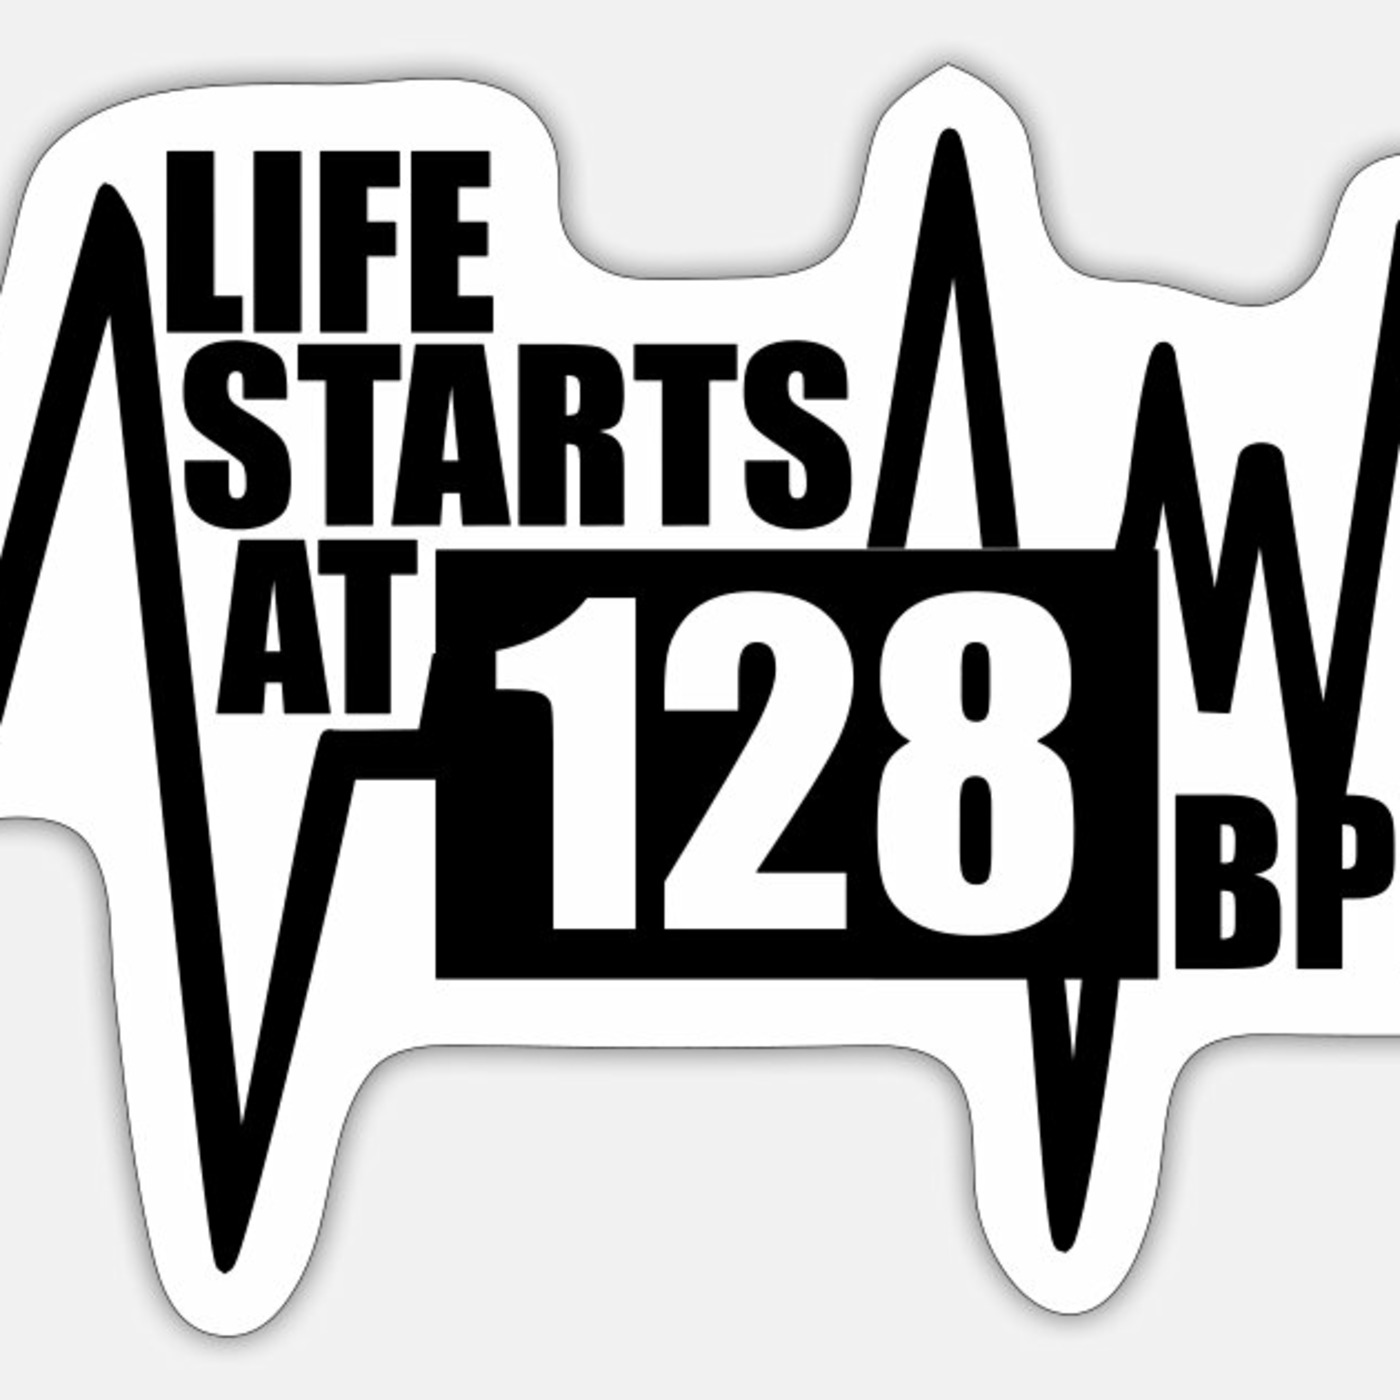 Episode 142: LIFE STARTS @ 128 BPM (CANALE)